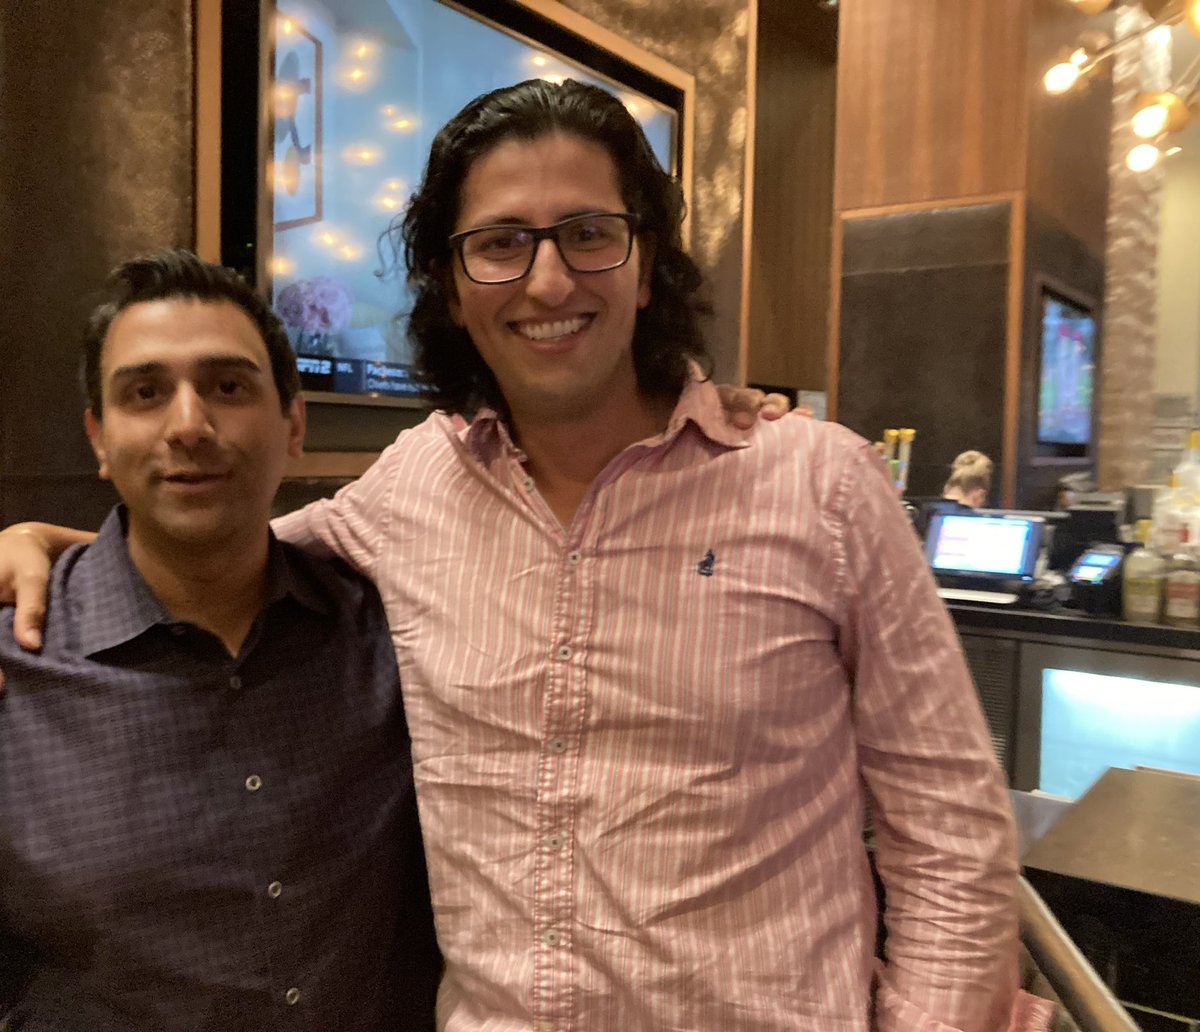 So, 2 guys named Rahul Sharma walk into a structural meeting....<insert punchline here> 😂. Always great catching up w/ my friend the REAL @drrahulpsharma ! Honored to share the name! #CVI2023 @DrMoritzWvB @pkothapalliMD @ParulKakarMD @psorajja @cvinnovations 📸 cred @akcmahi